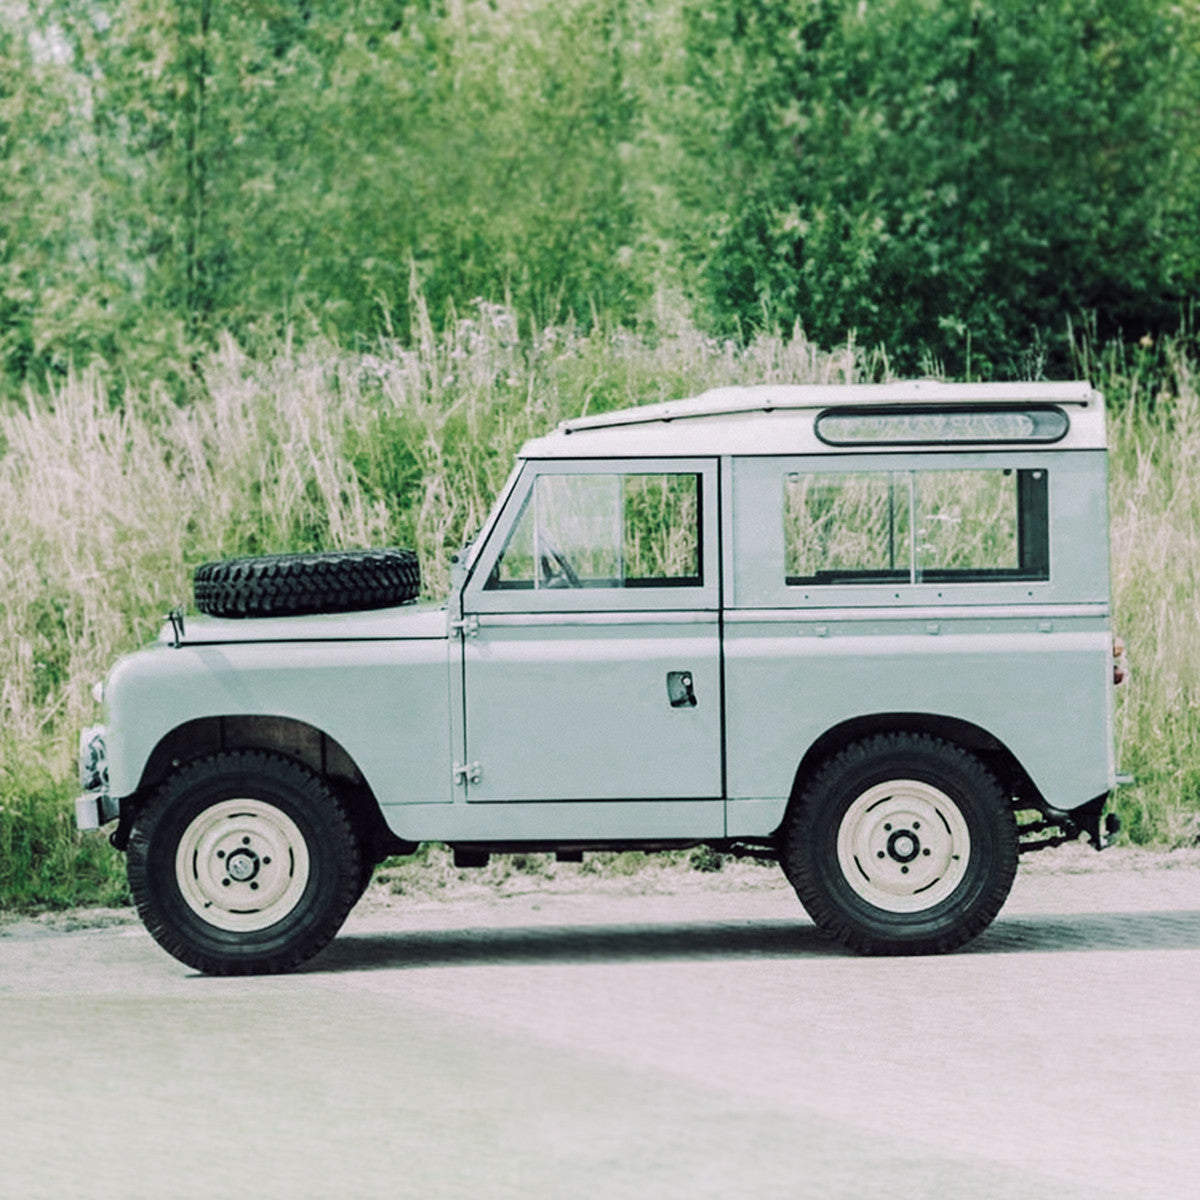 A CLASSIC: THE LAND ROVER, SERIES II